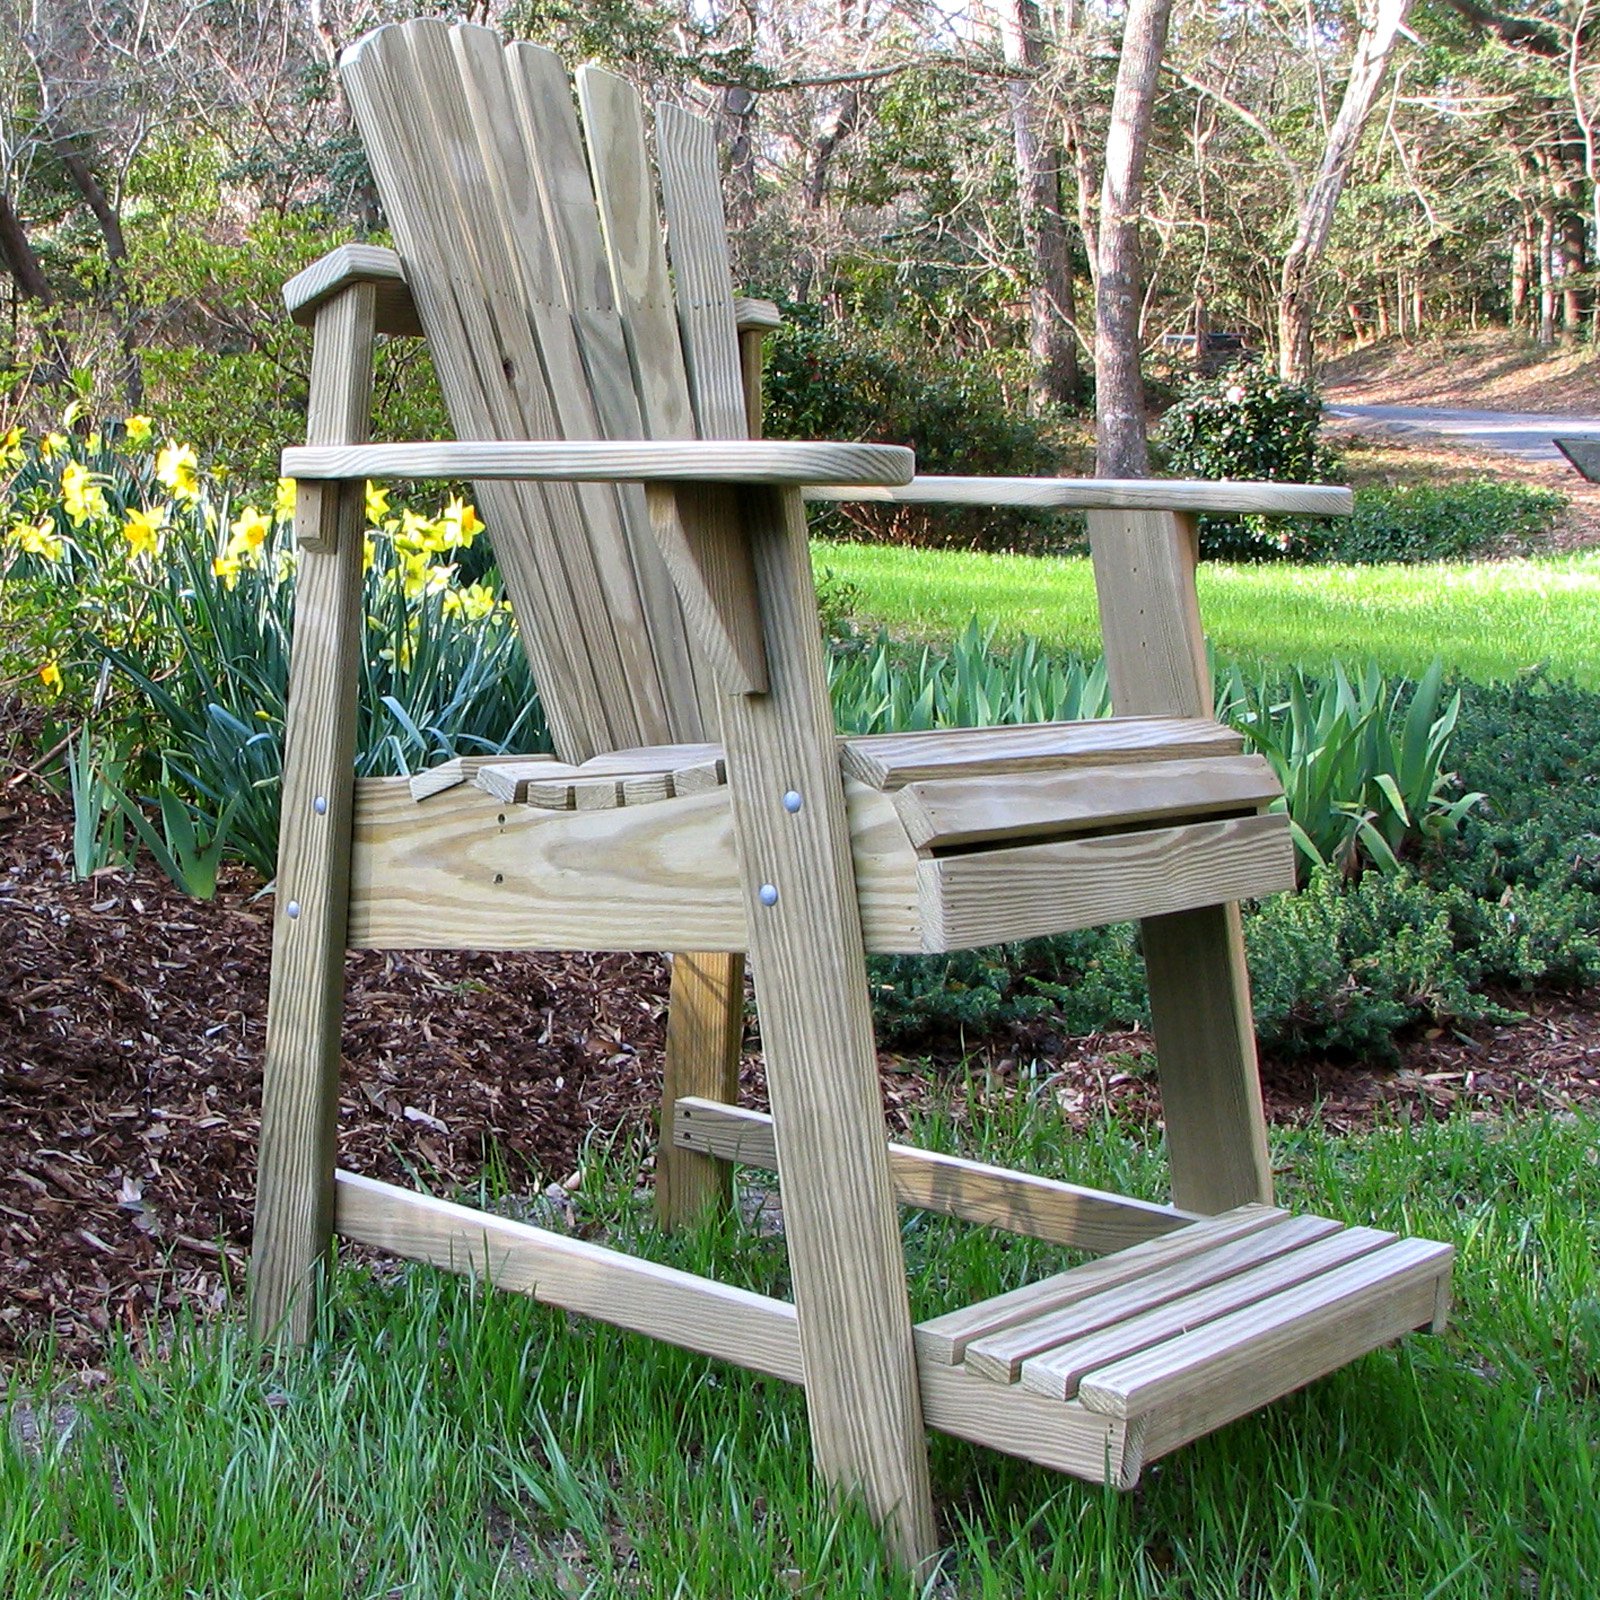 Weathercraft Designers Choice Treated Balcony Adirondack Chair with Footrest - Natural - image 3 of 8